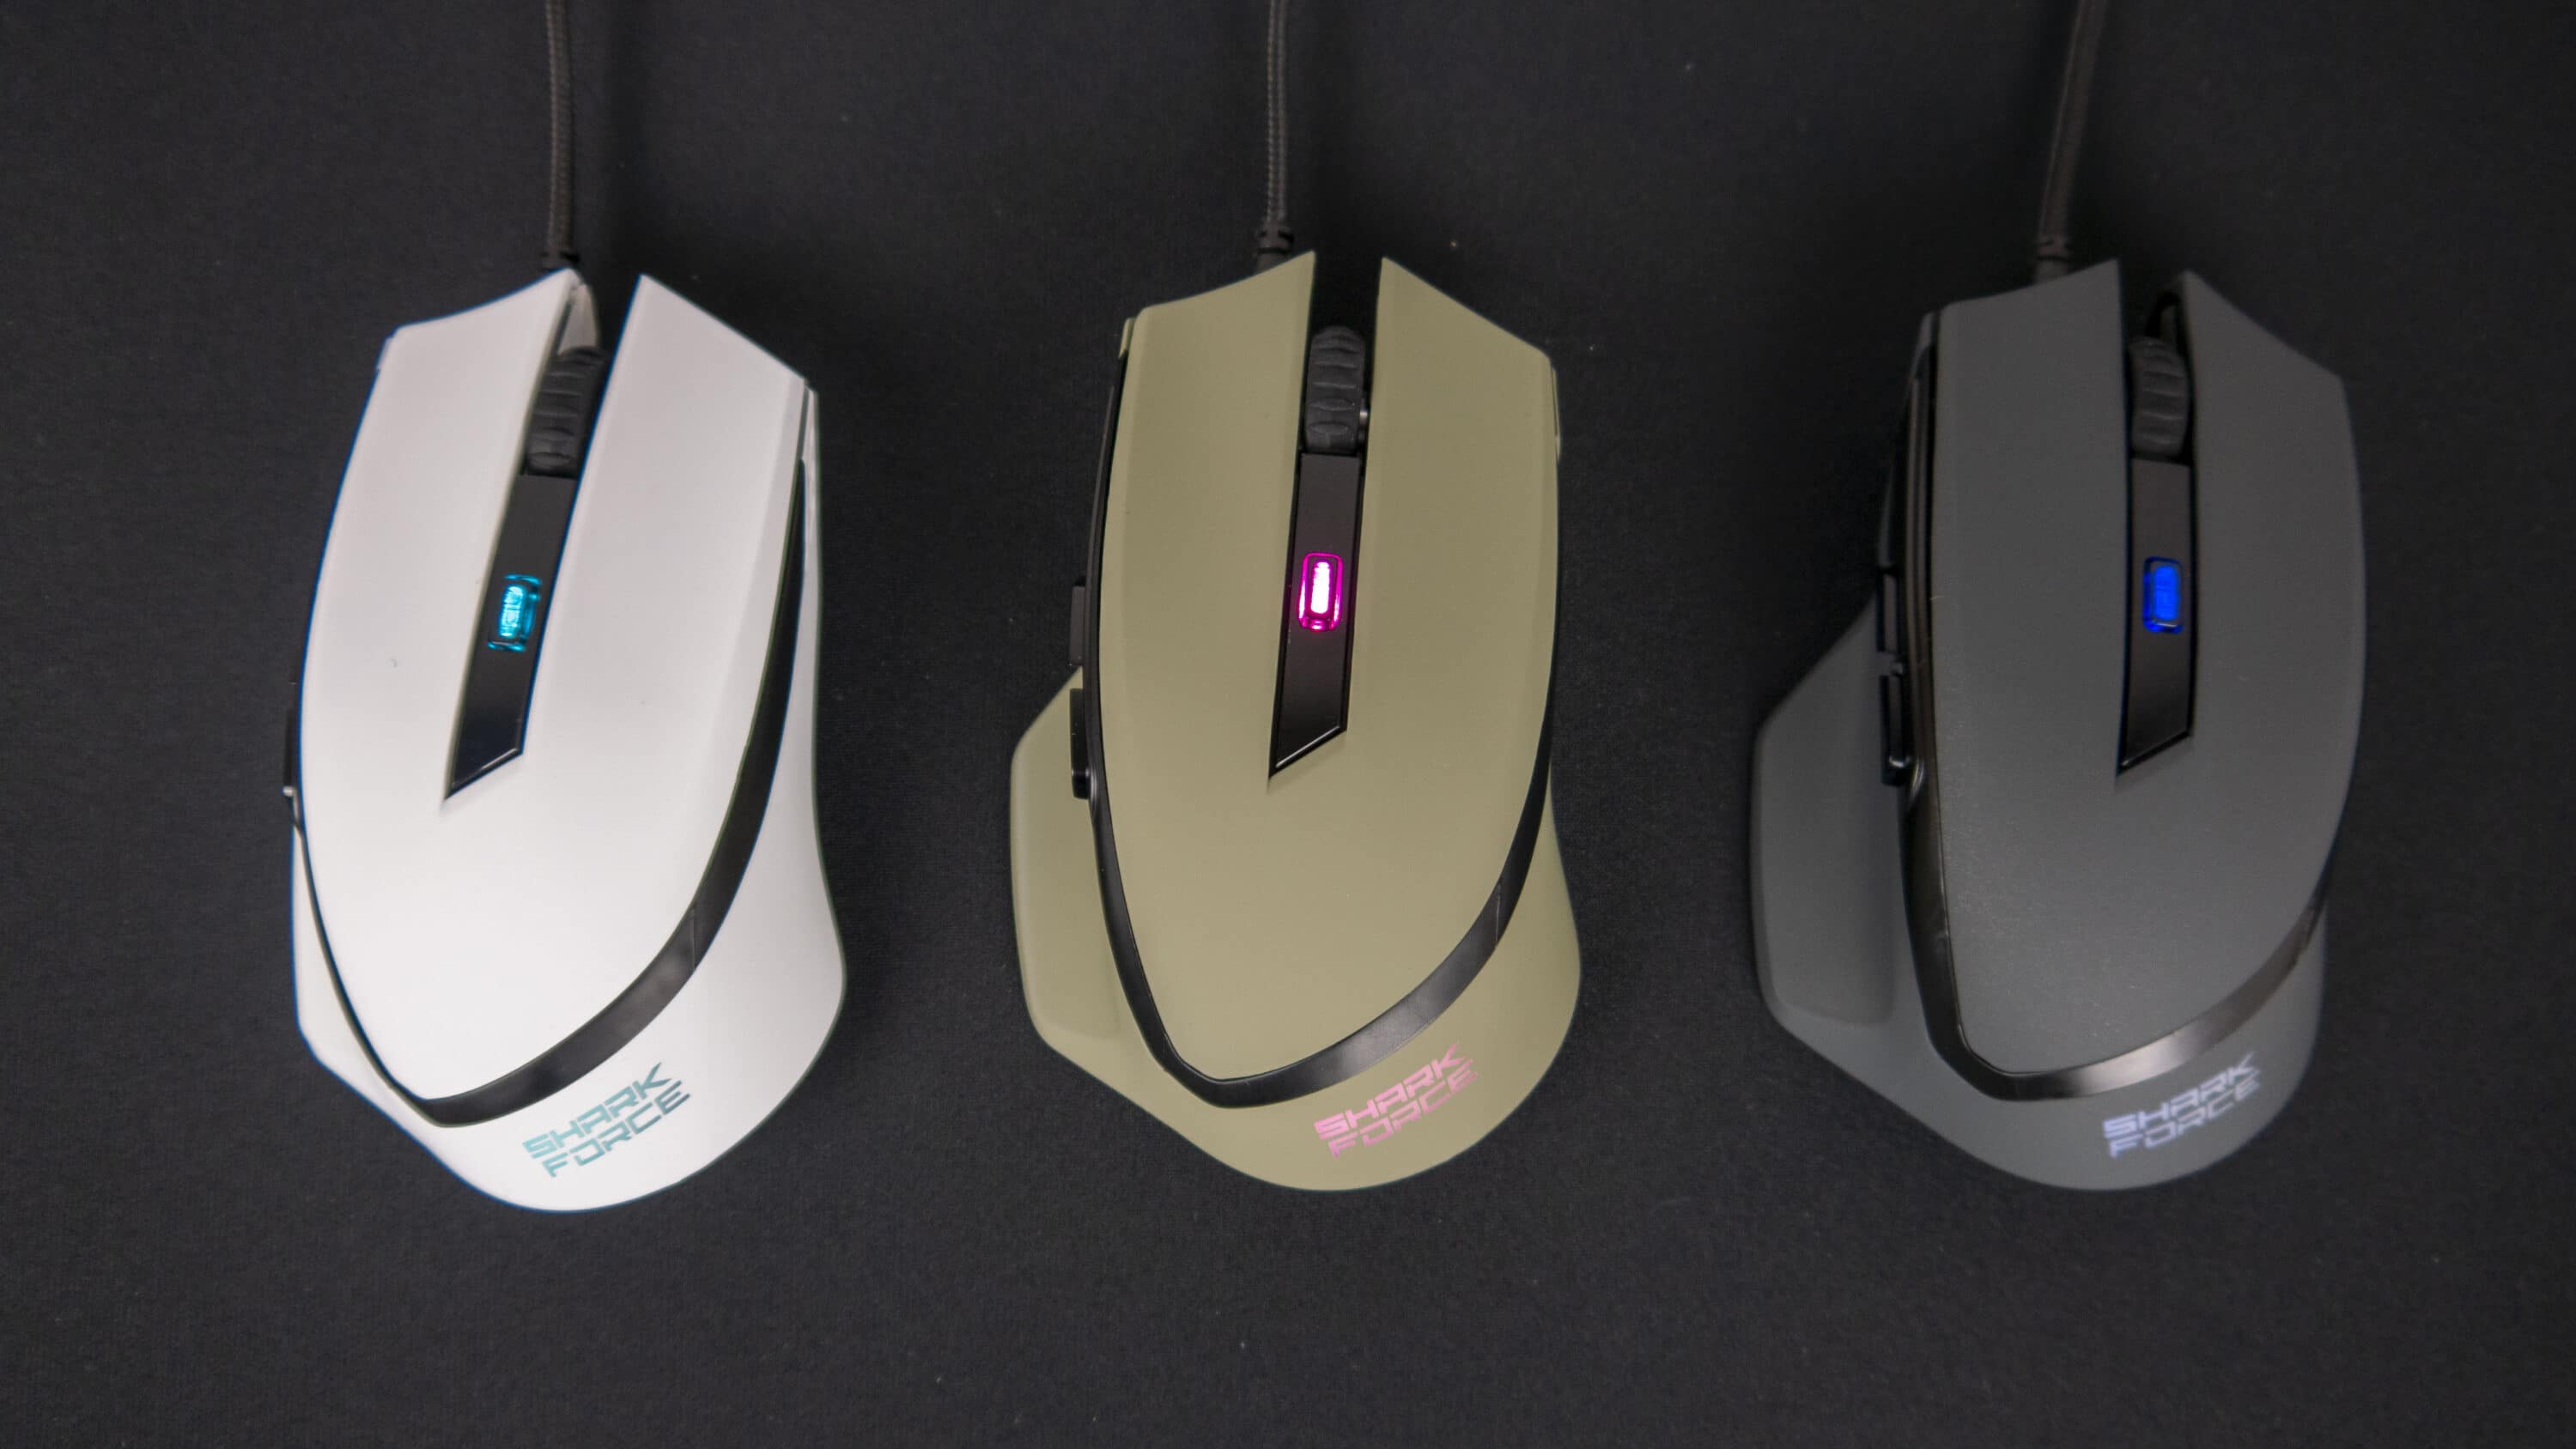 Cheap or low-priced? The Sharkoon Shark Force ll gaming mouse in test